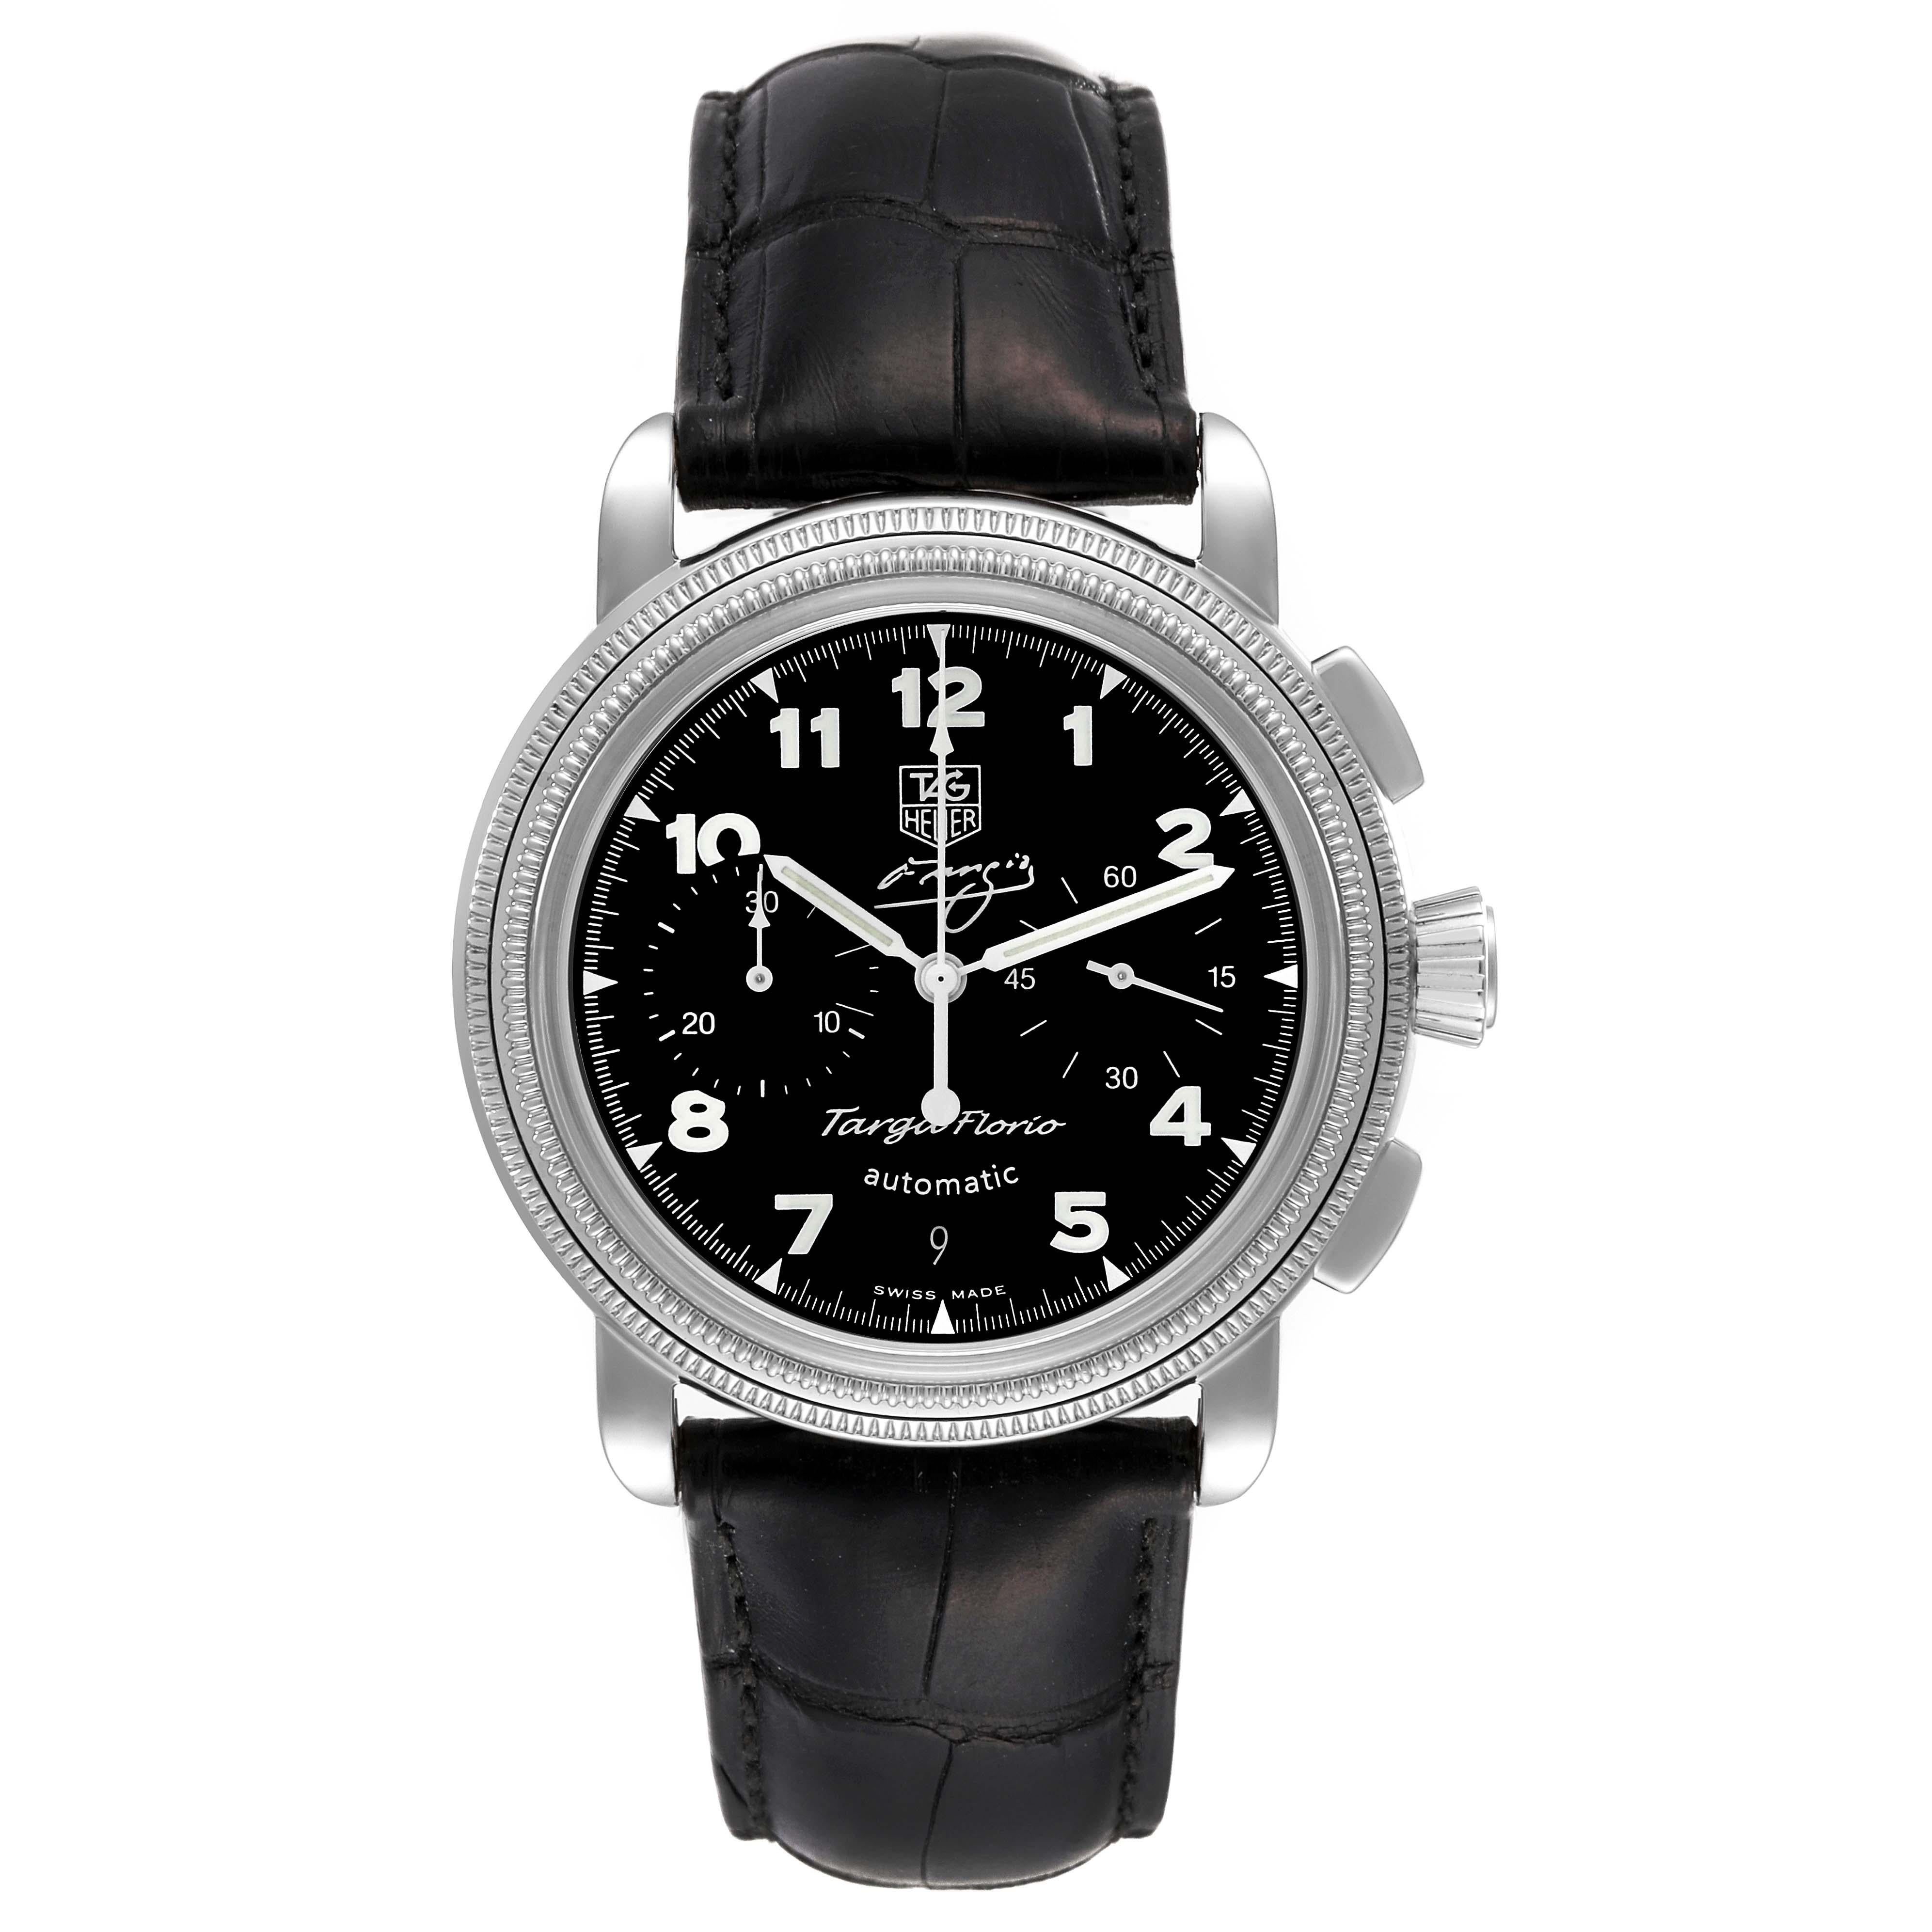 Tag Heuer Targa Florio Limited Edition Steel Mens Watch CX2113. Automatic self-winding chronograph movement. Stainless steel case 40 mm in diameter. Stainless steel coin edged bezel. Scratch resistant sapphire crystal. Black dial with luminous white